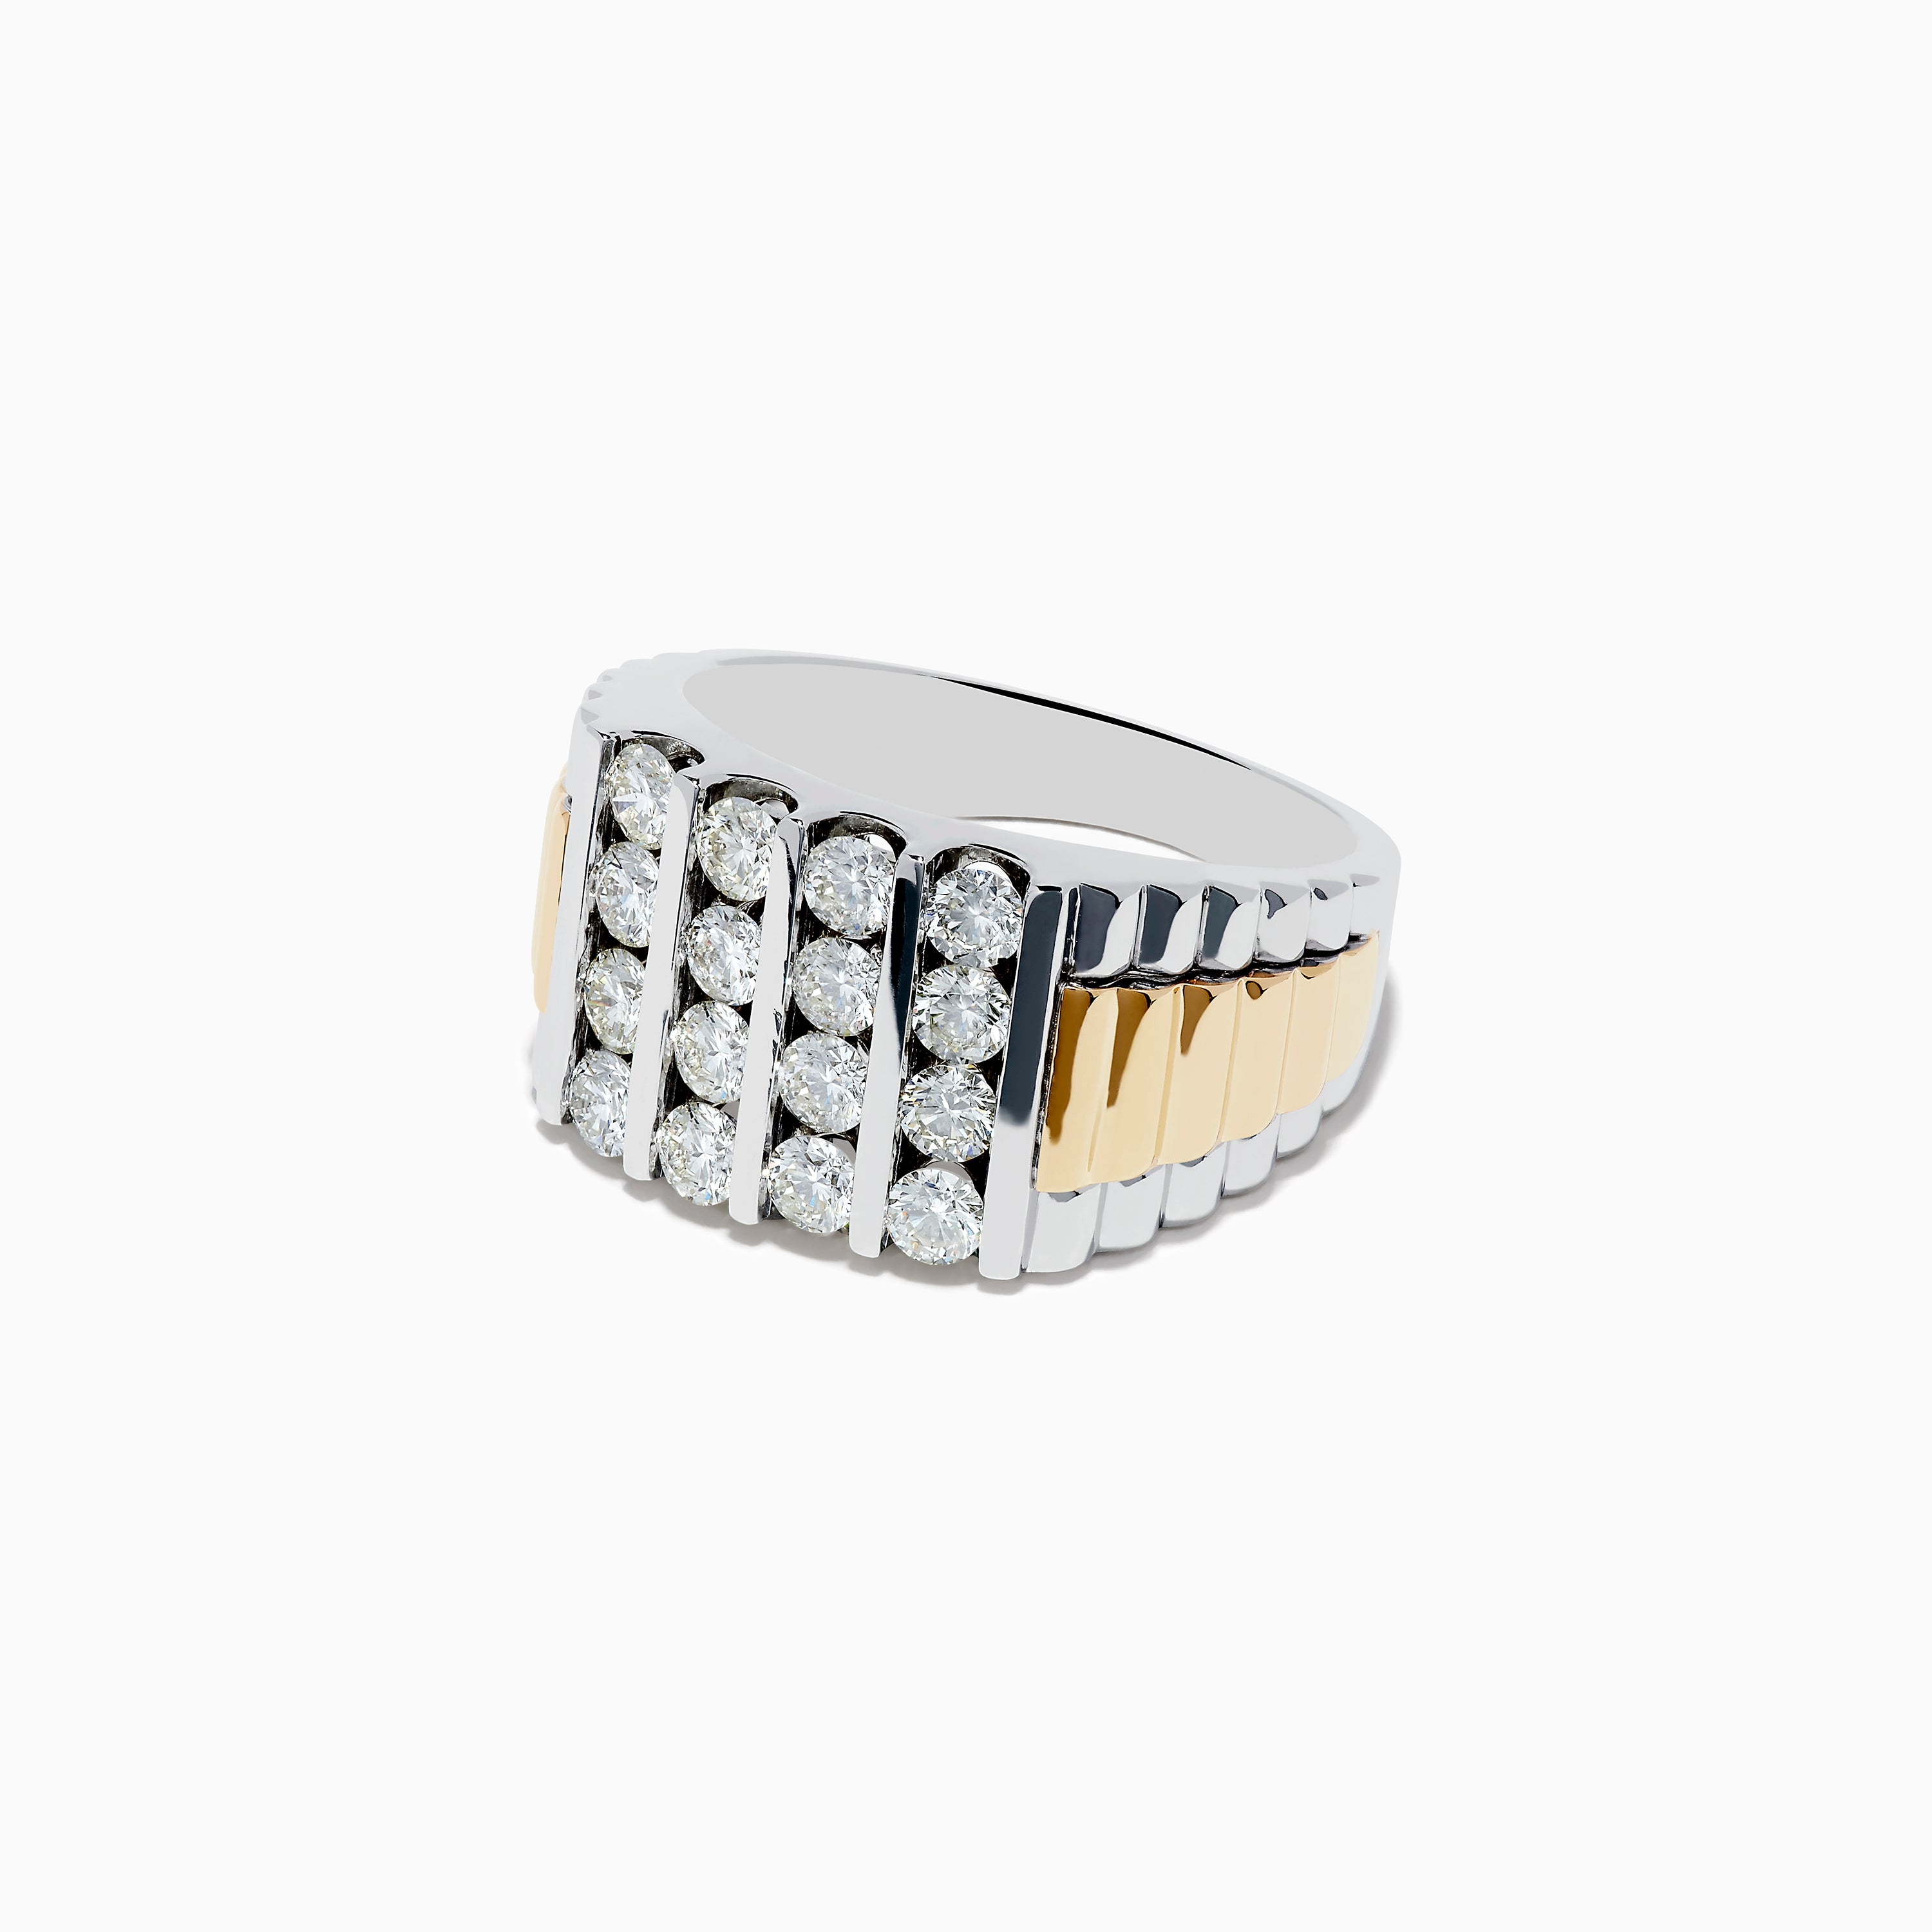 Buy Two Tone Rolex Ring Online In India - Etsy India